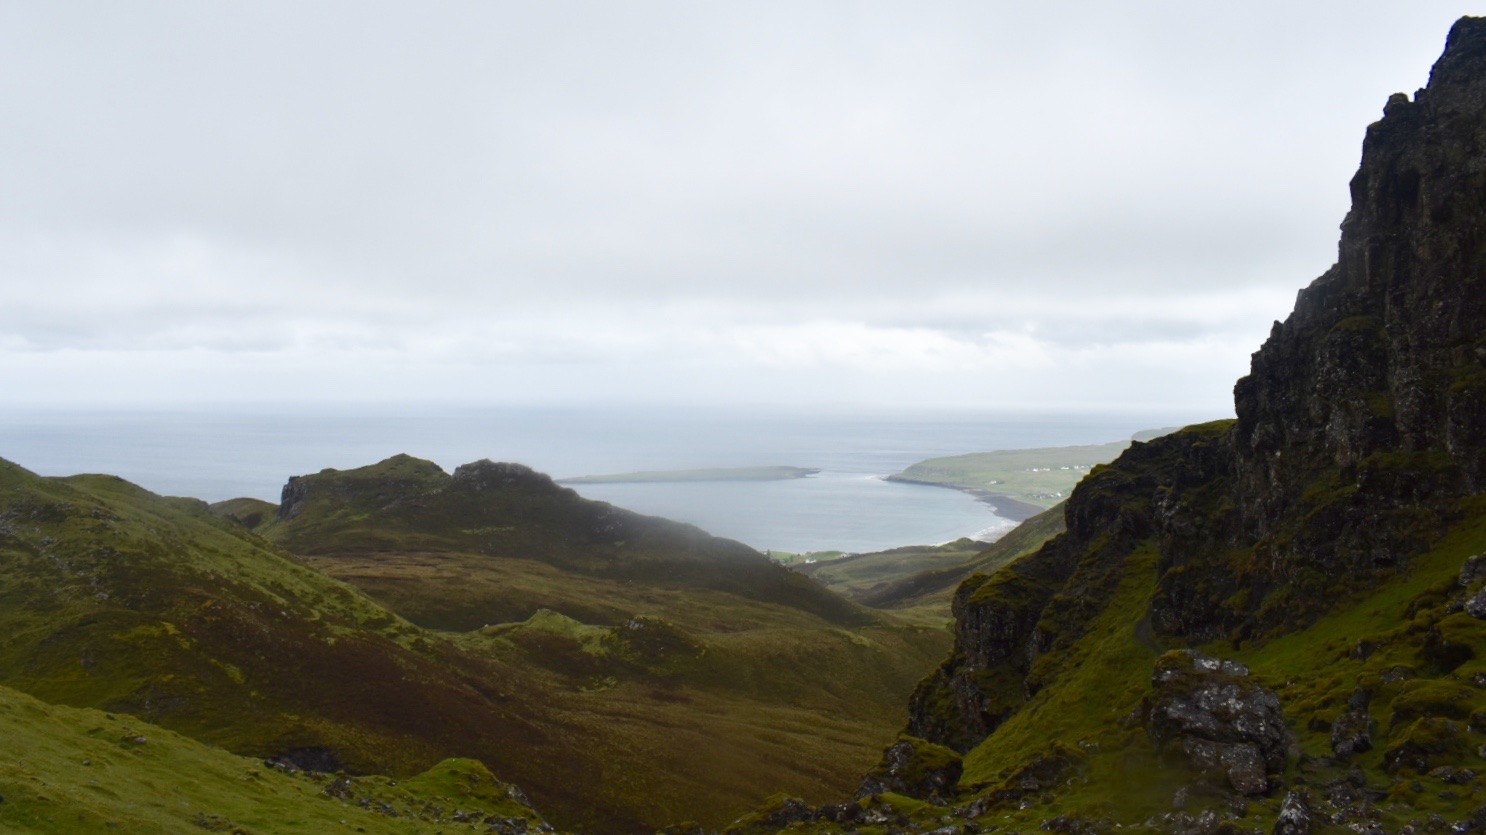 The Quiraing walking route